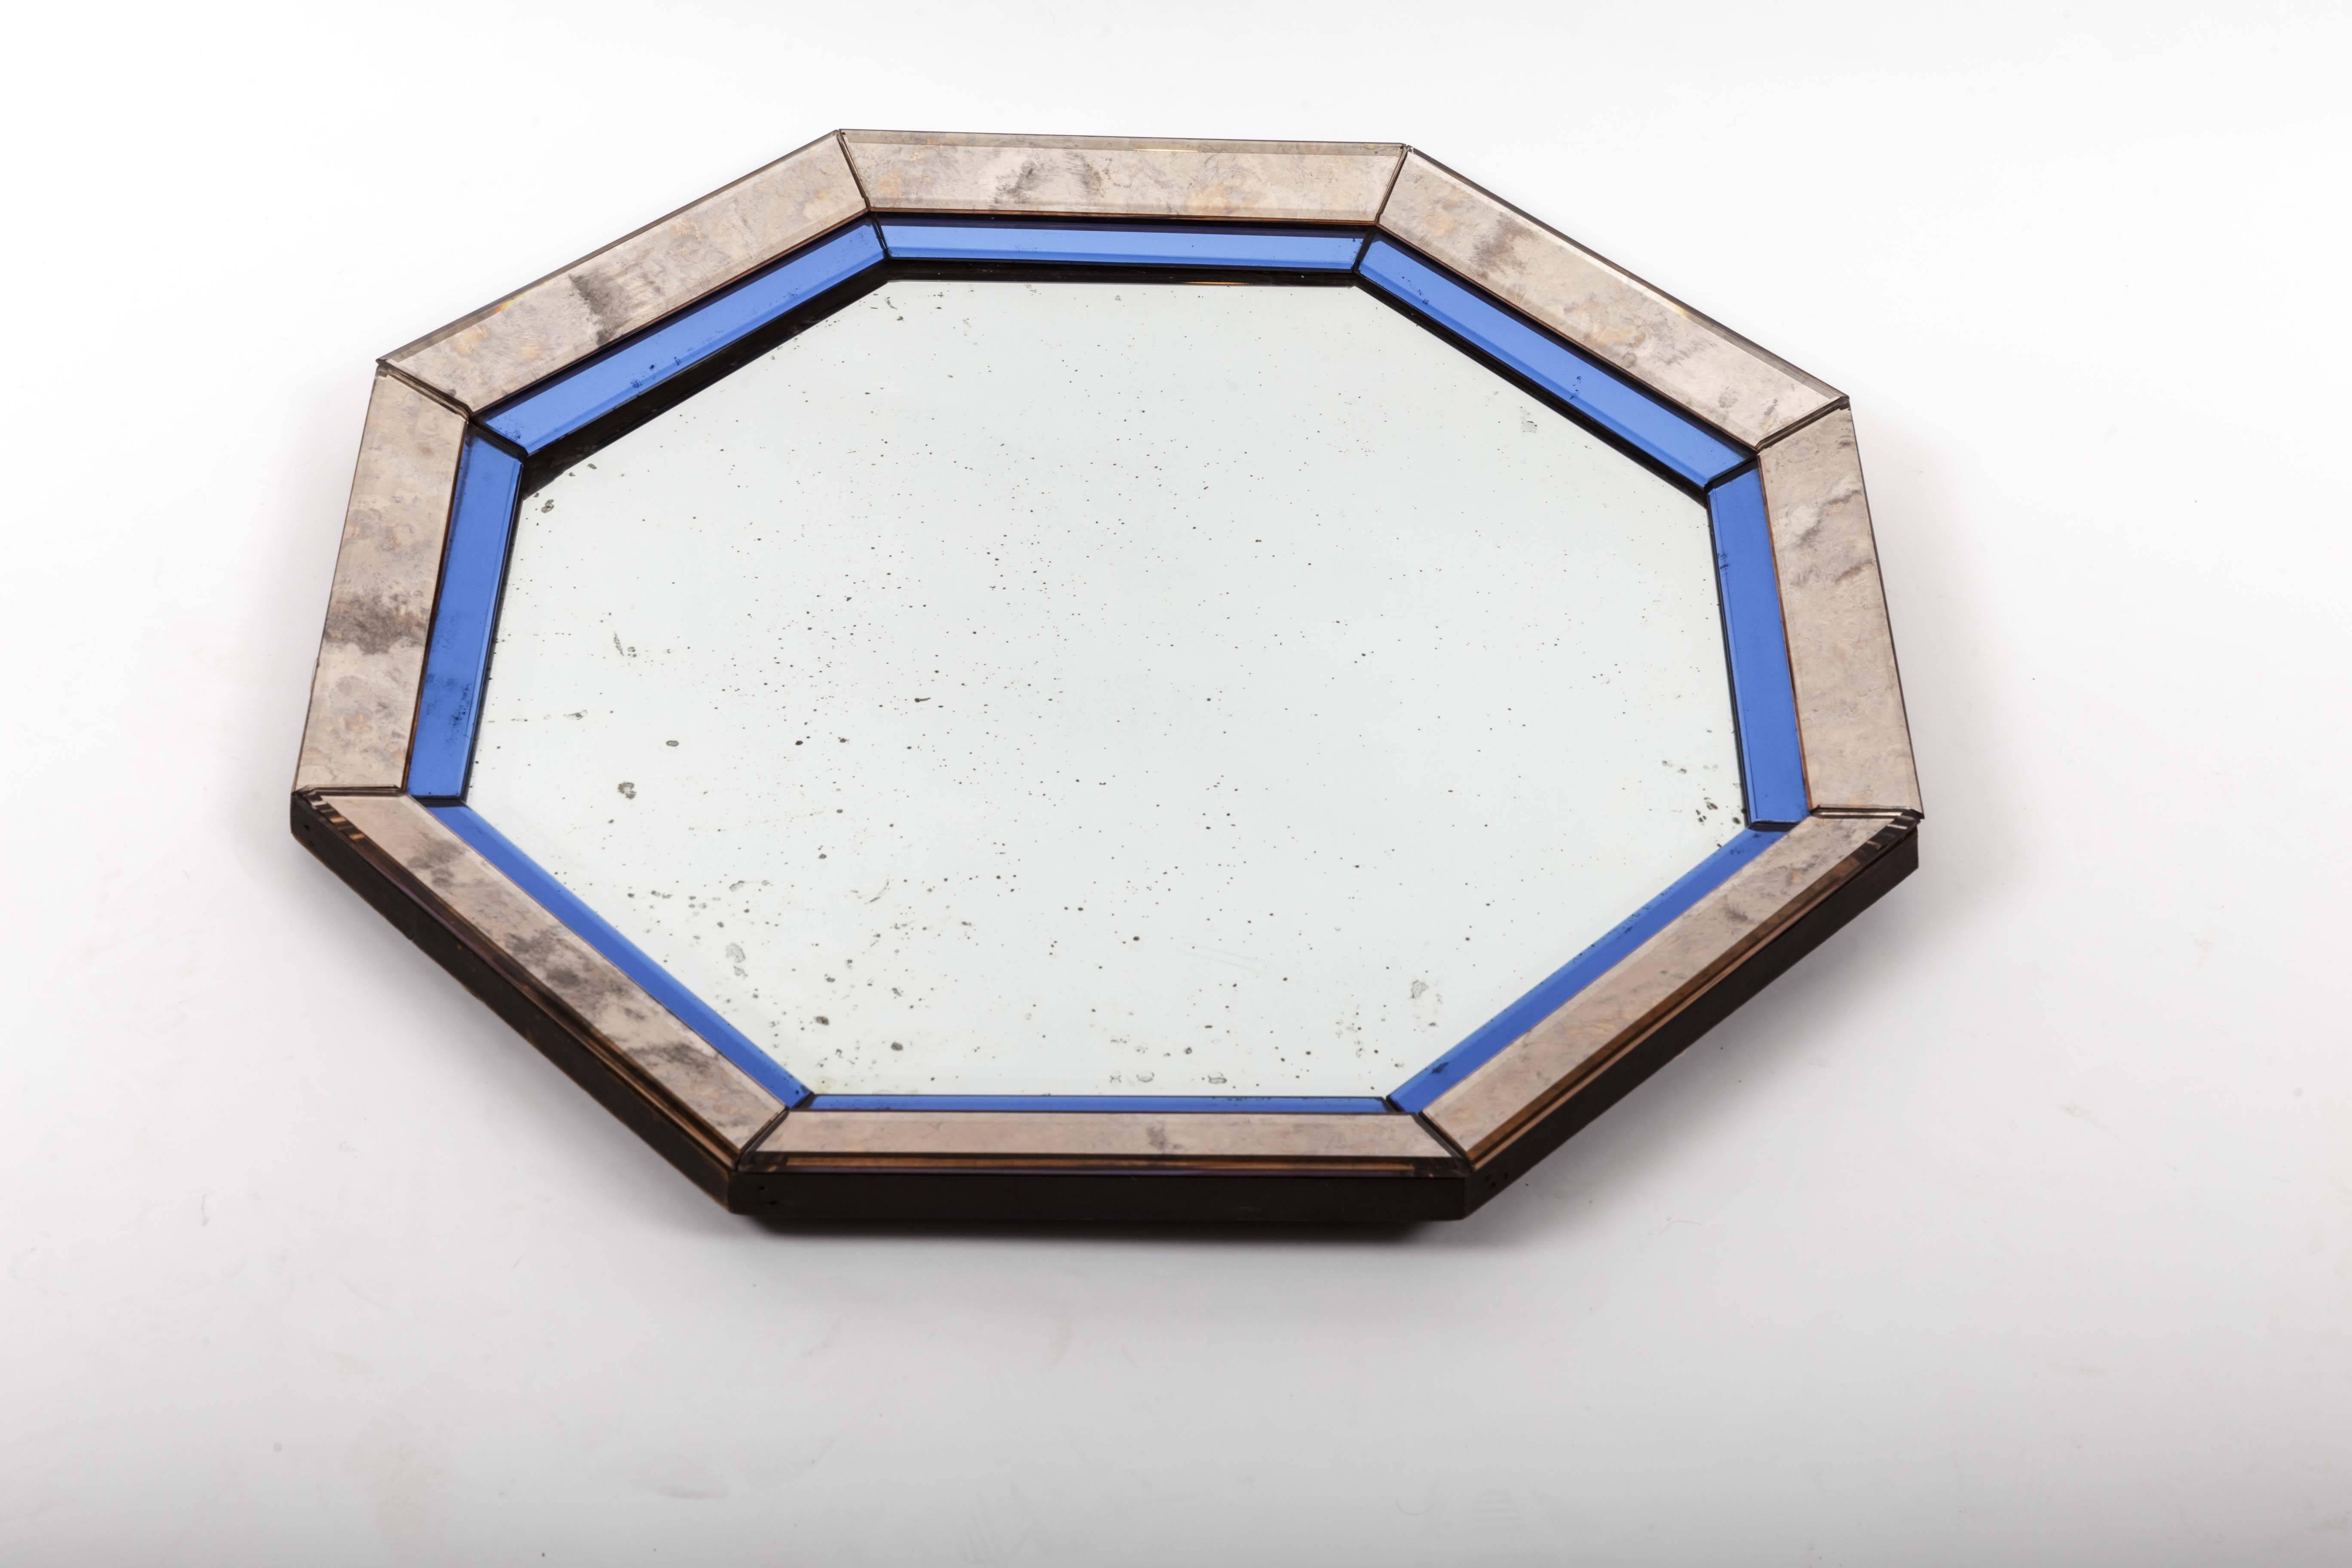 Mirror in an octagonal shape with blue and antiqued silver frame.